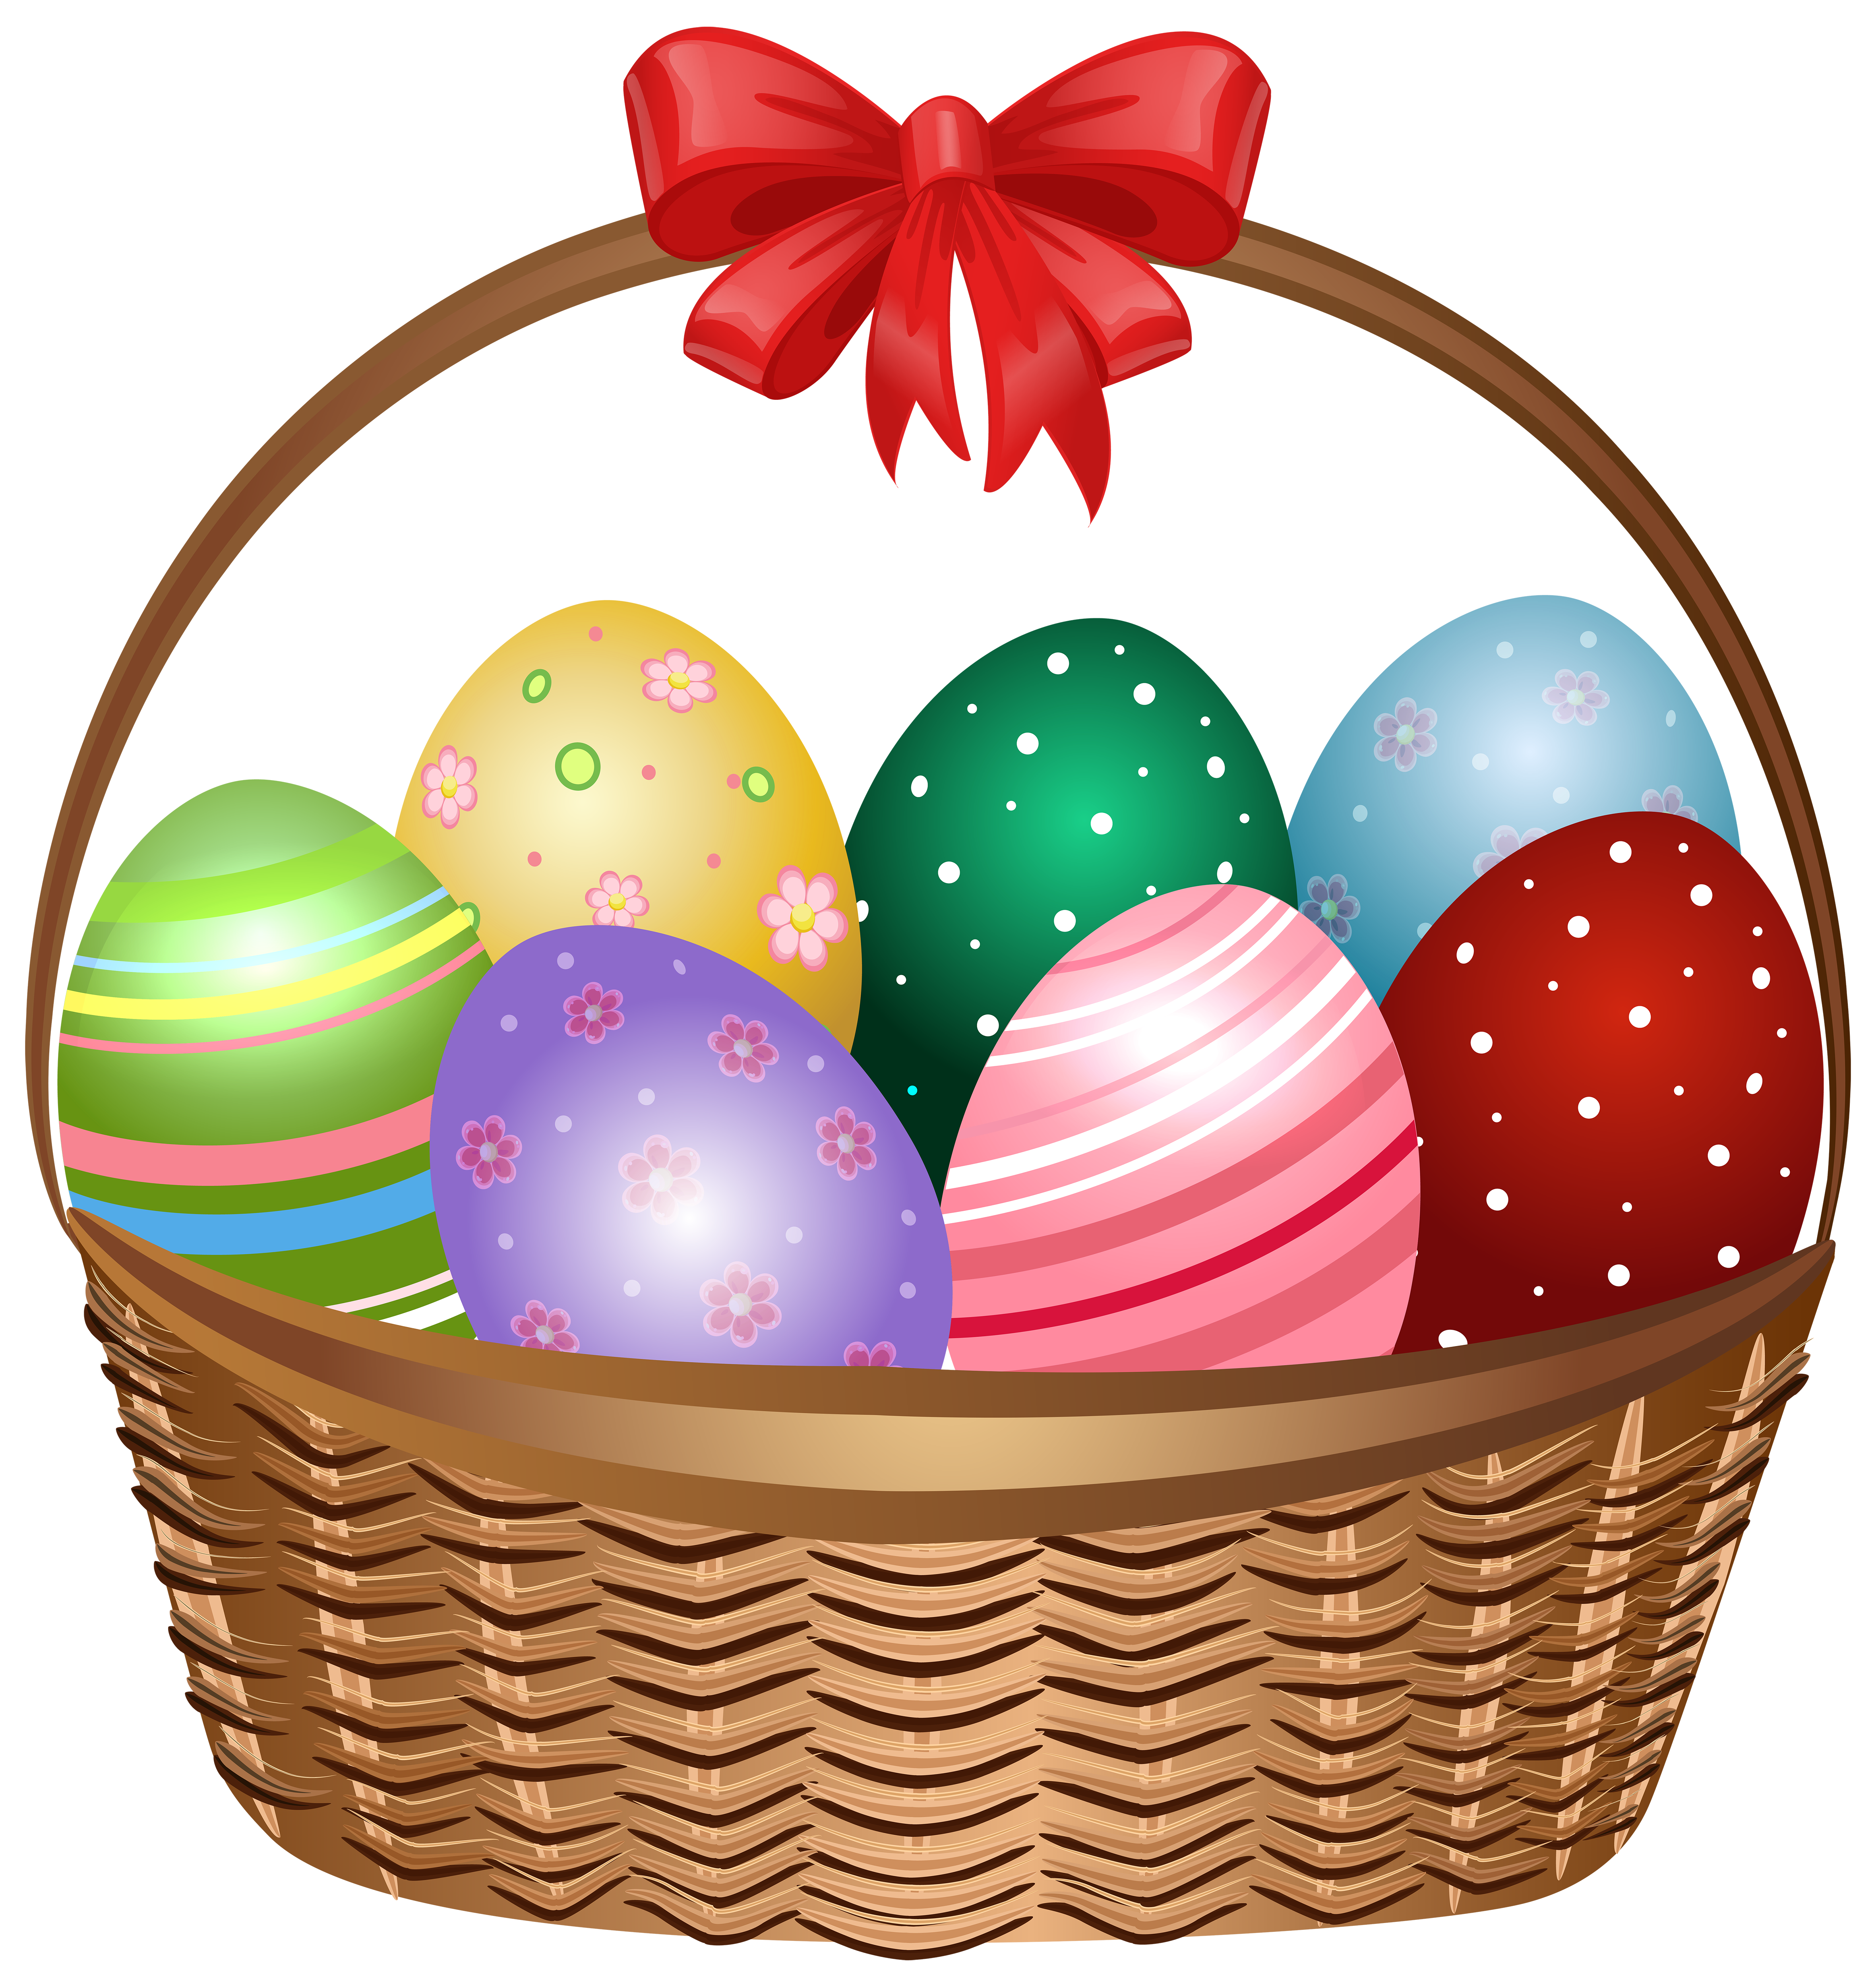 Basket Easter Bunny Free HQ Image Clipart